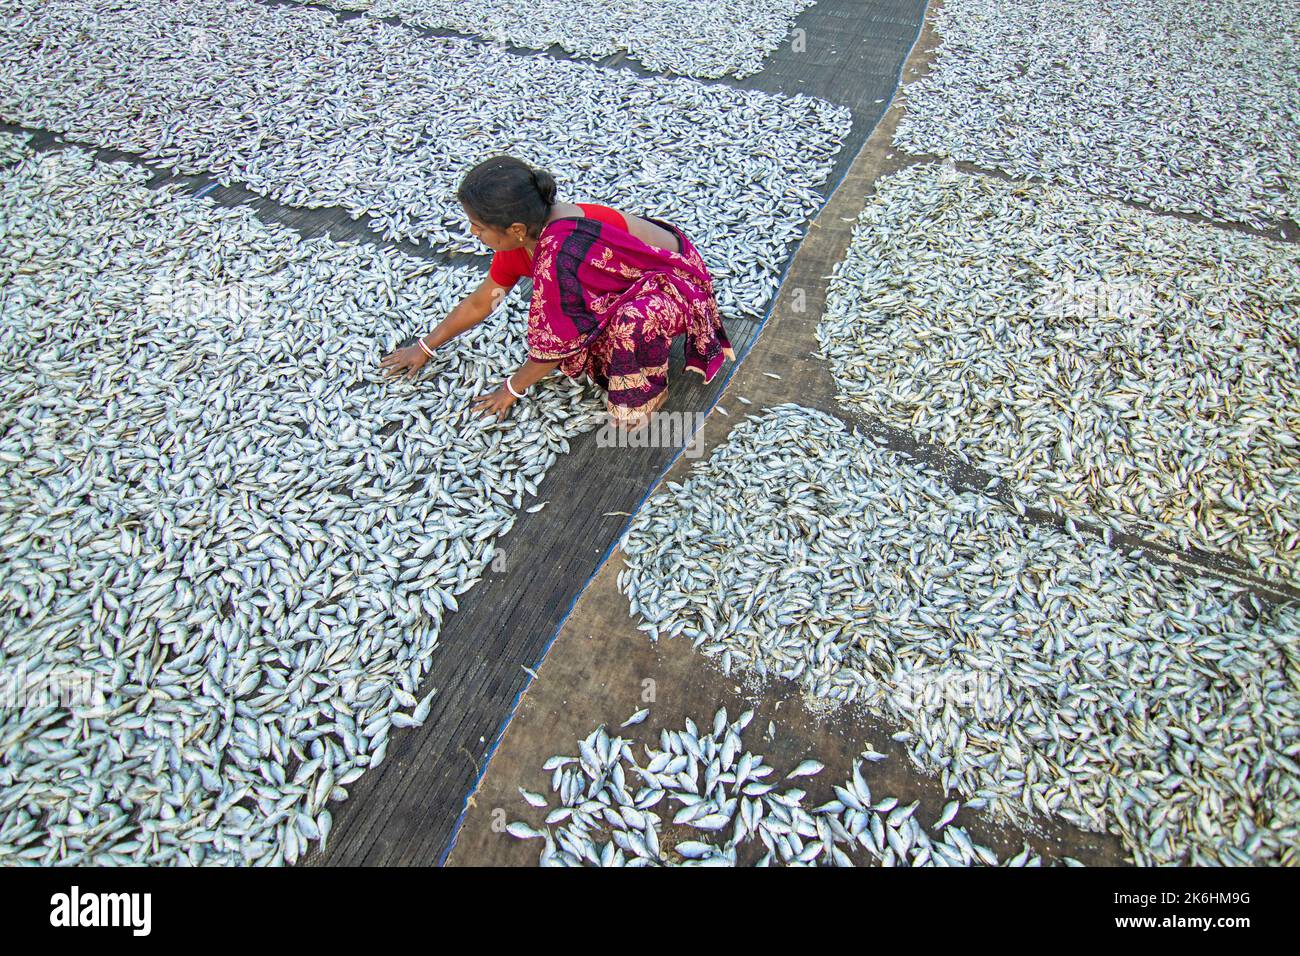 Women process small fishes for dry fish business. Workers cut and clean the fishes, add salt and then dry them on a bamboo platform. Stock Photo